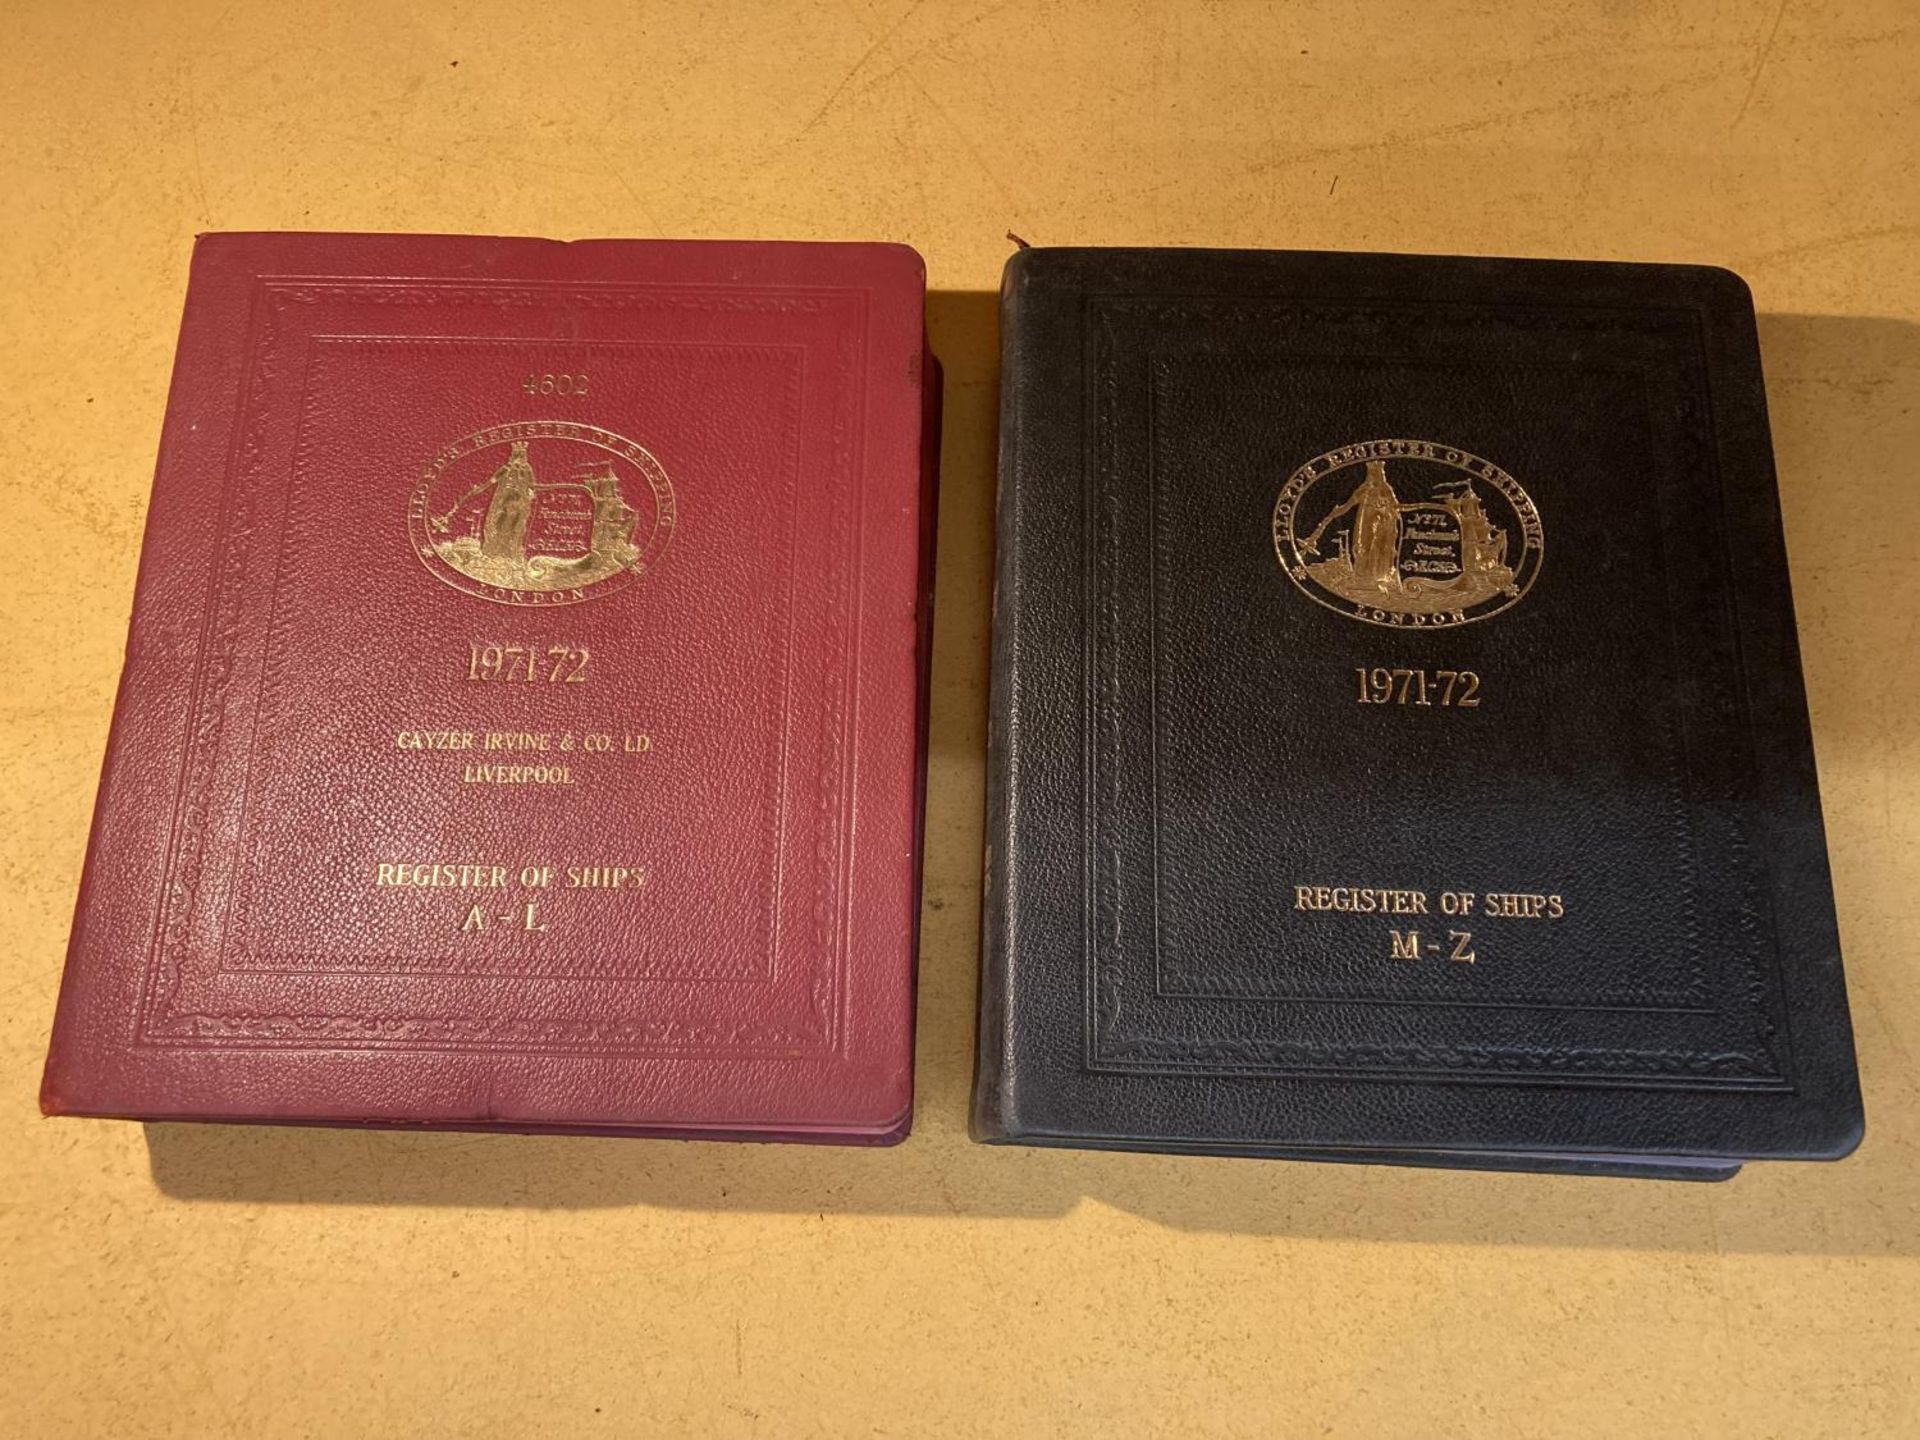 LLOYD'S REGISTER OF SHIPPING 1971-72 TWO VOLUMES A-L & M-Z LEATHER BOUND